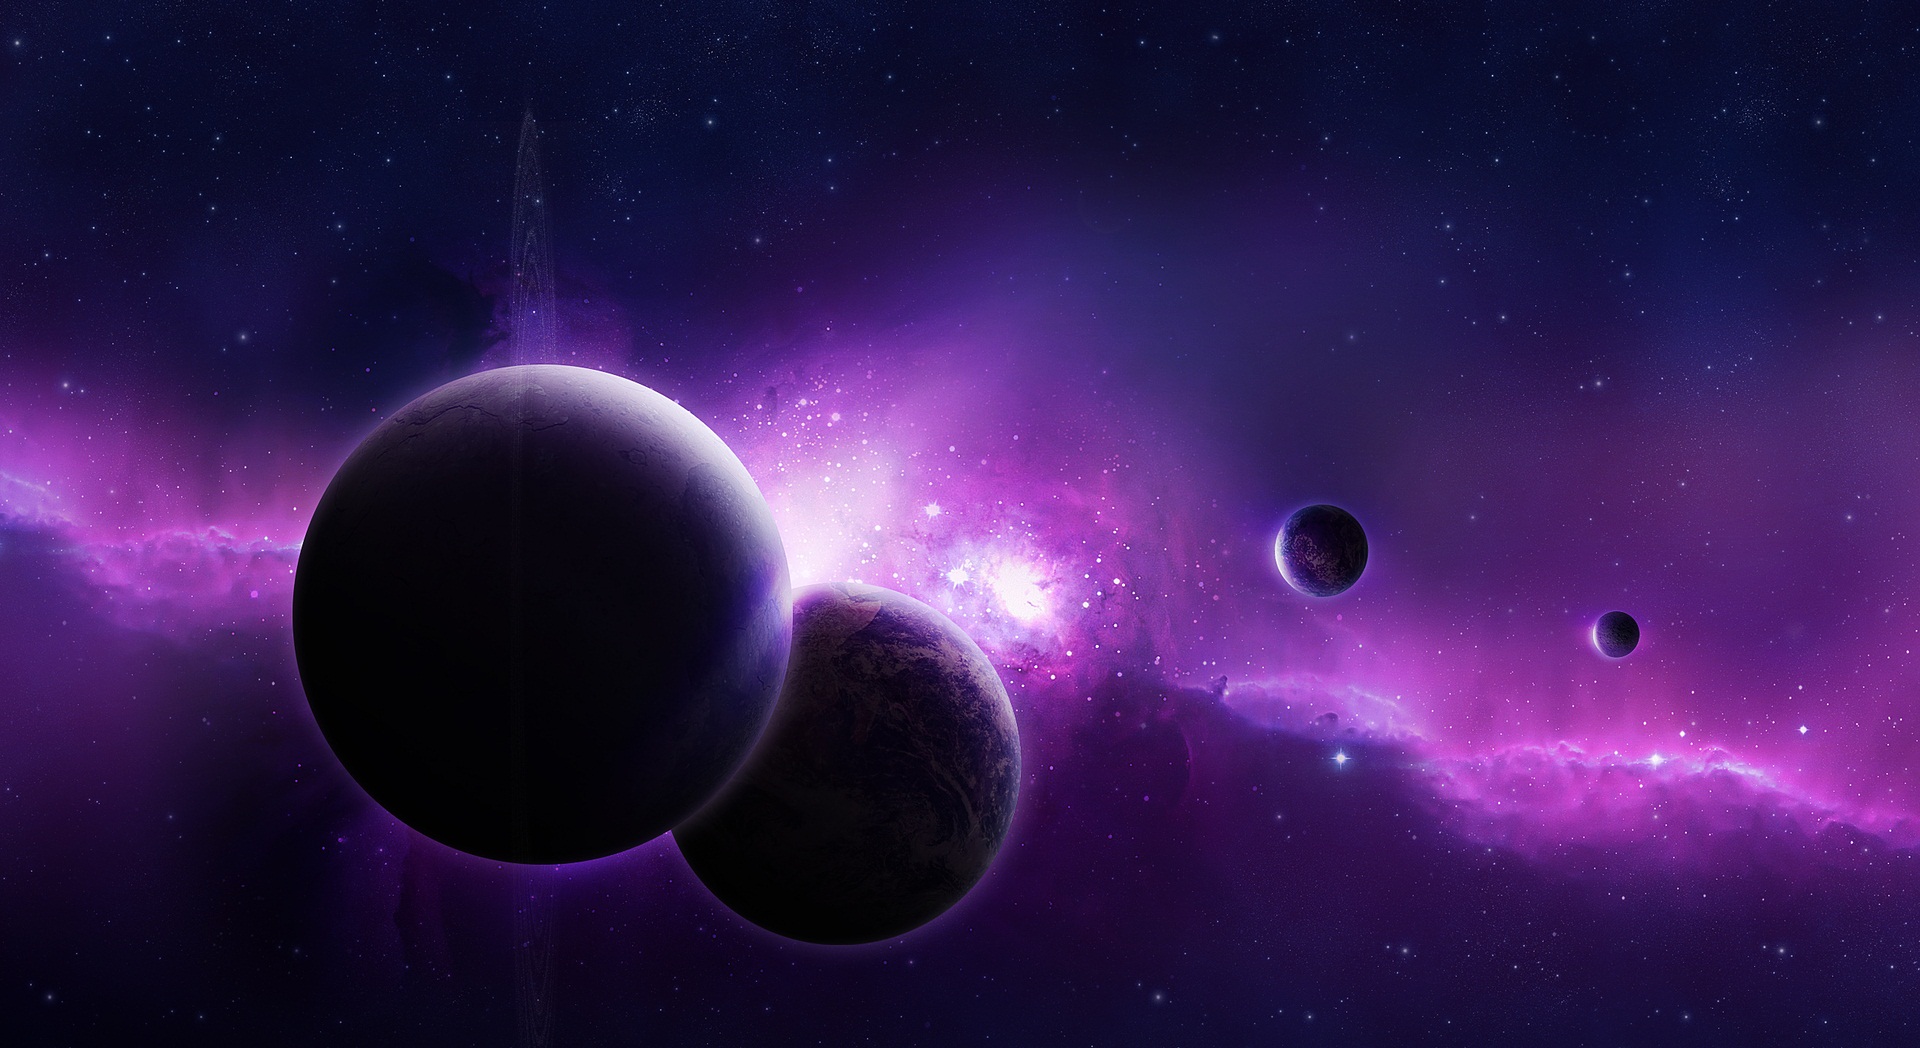 Pink And Purple Galaxy Backgrounds Images amp Pictures   Becuo